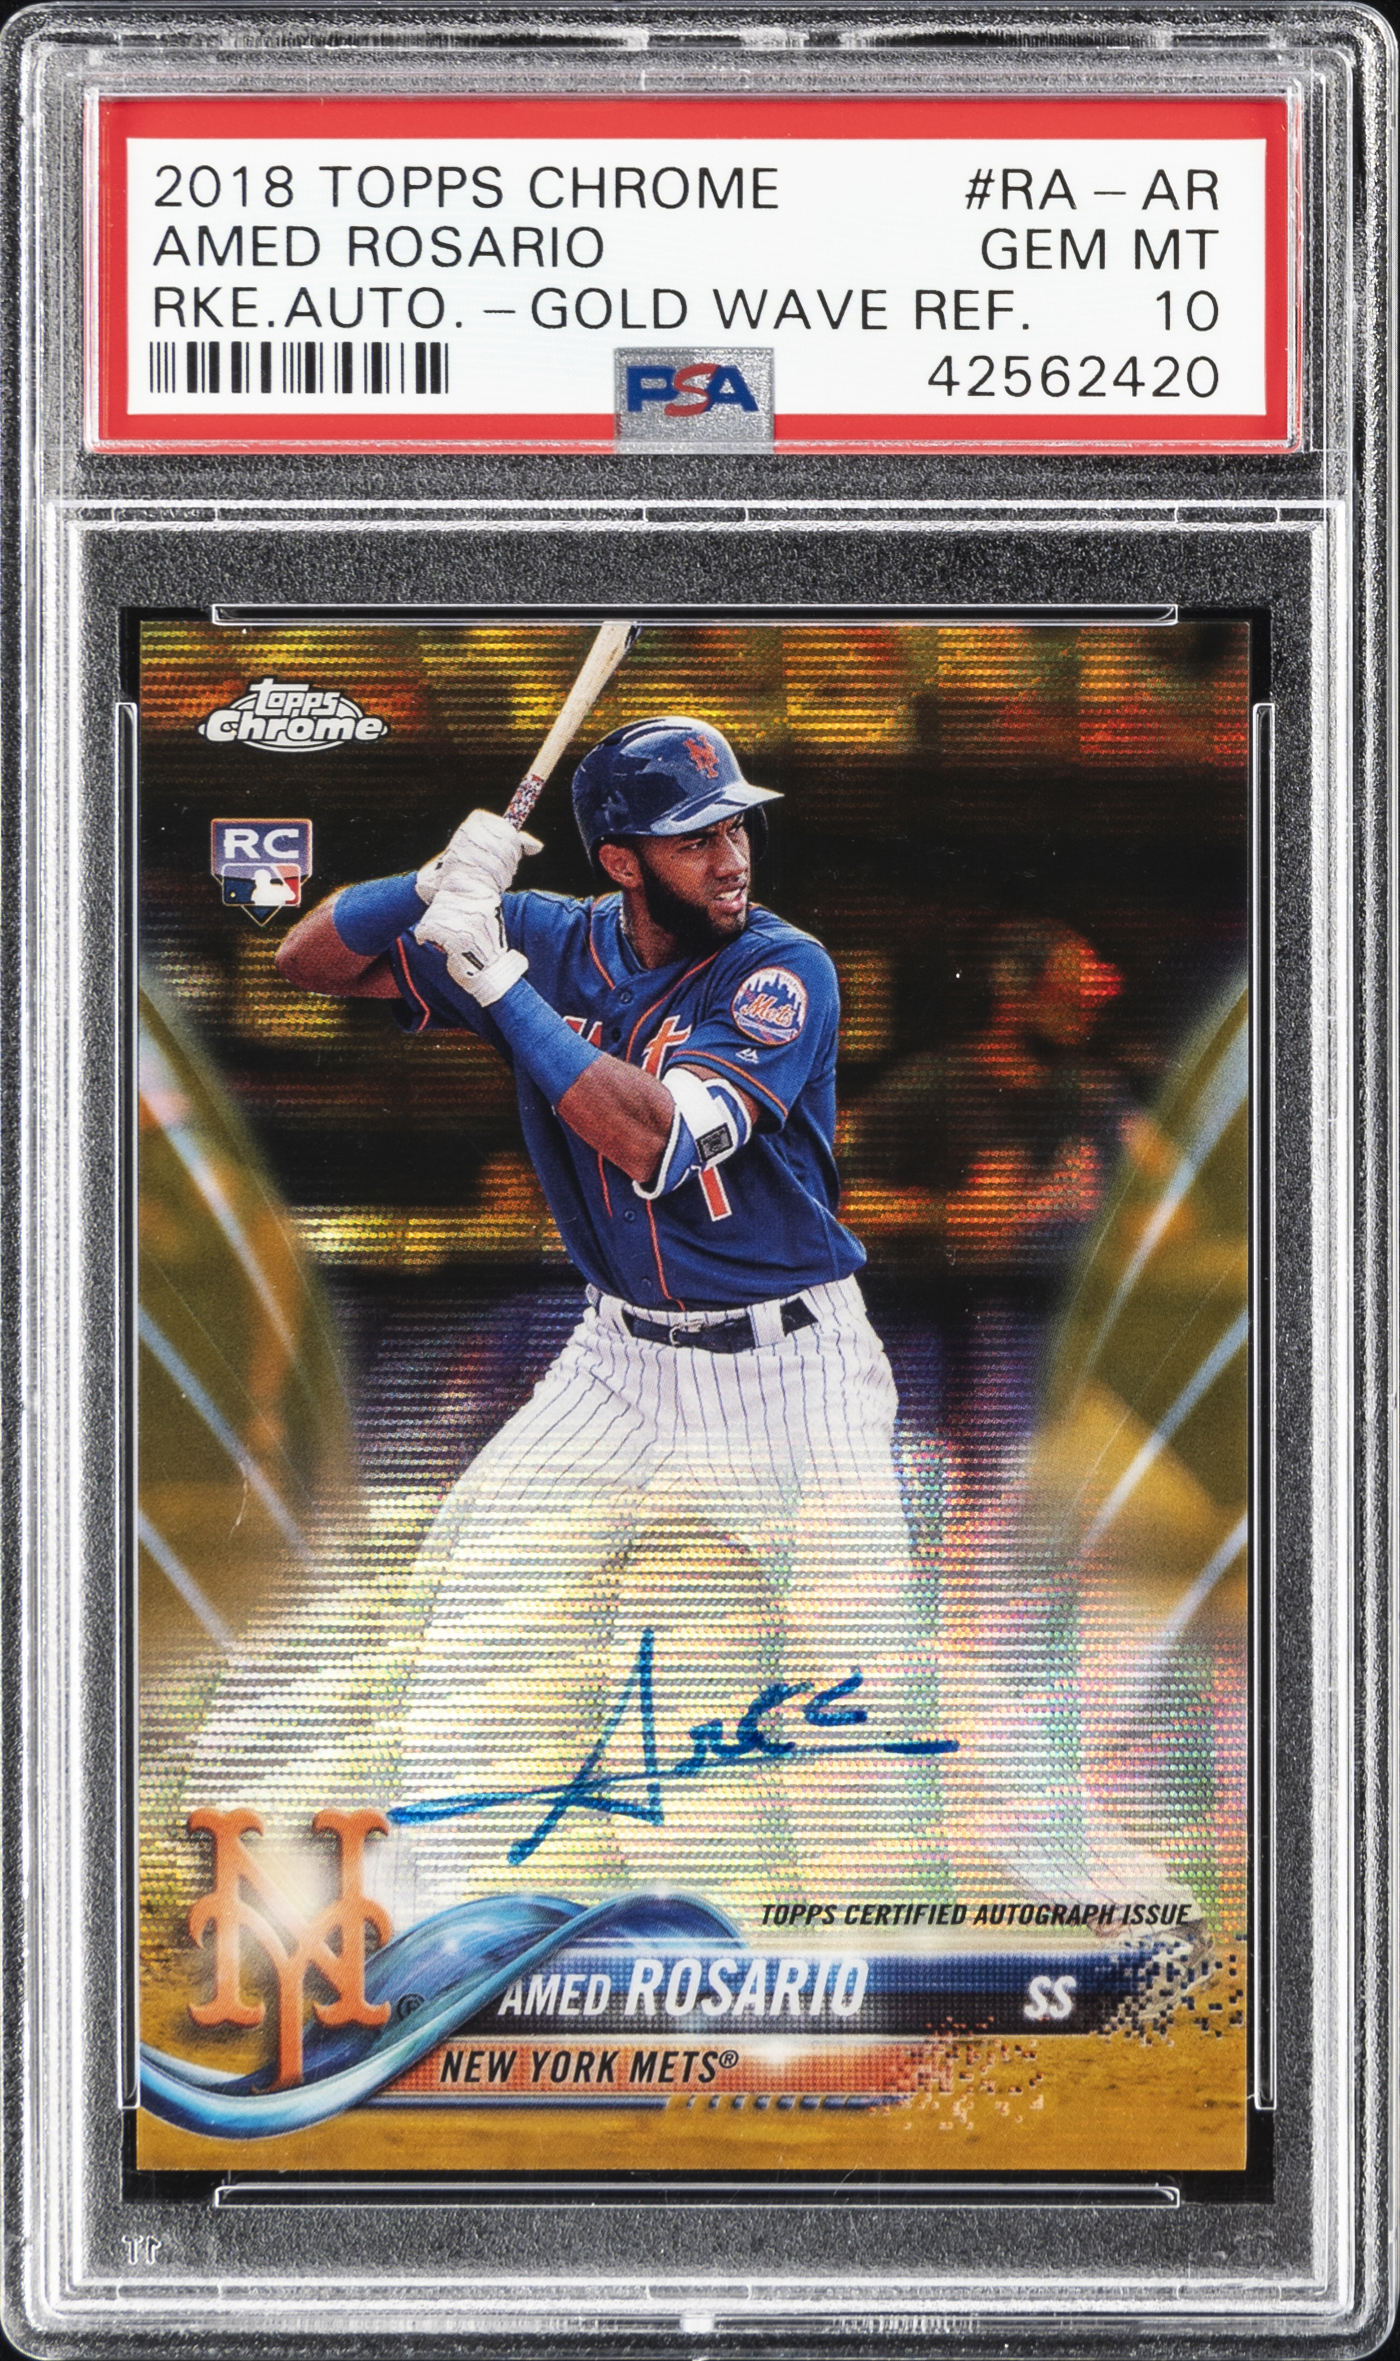 2018 Topps Chrome Rookie Autograph Gold Wave Refractor #RA-AR Amed Rosario Signed Rookie Card (#38/50) – PSA GEM MT 10